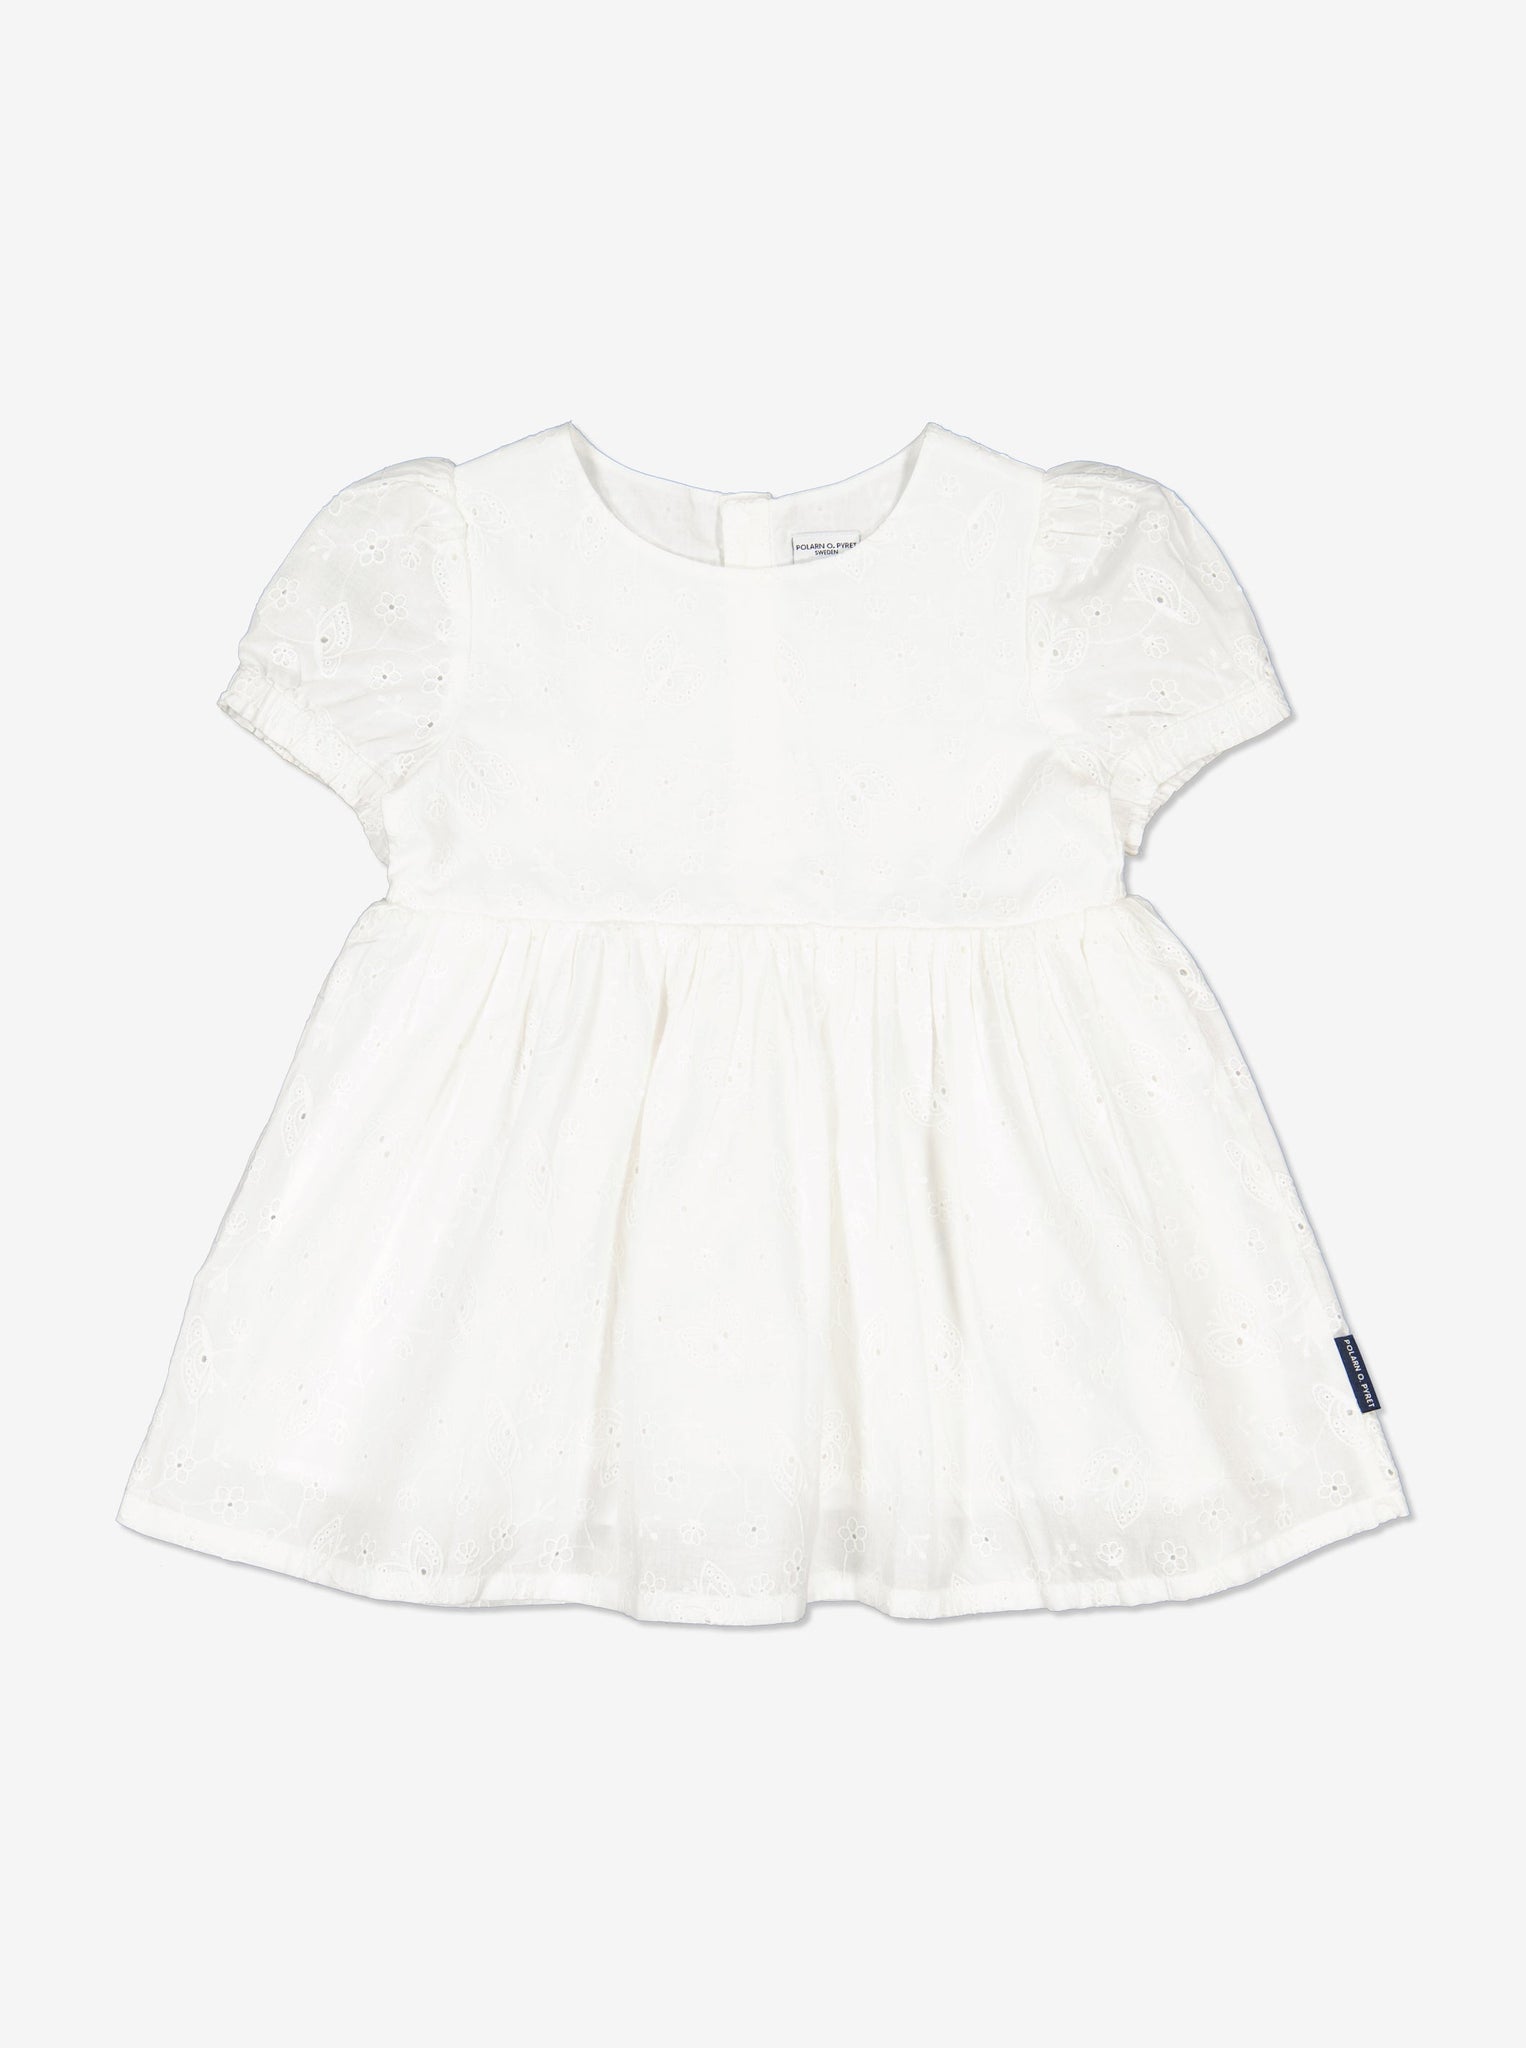 Butterfly Kids Summer Dress In White from Polarn O. Pyret Kidswear. Made from 100% GOTS Organic Cotton.